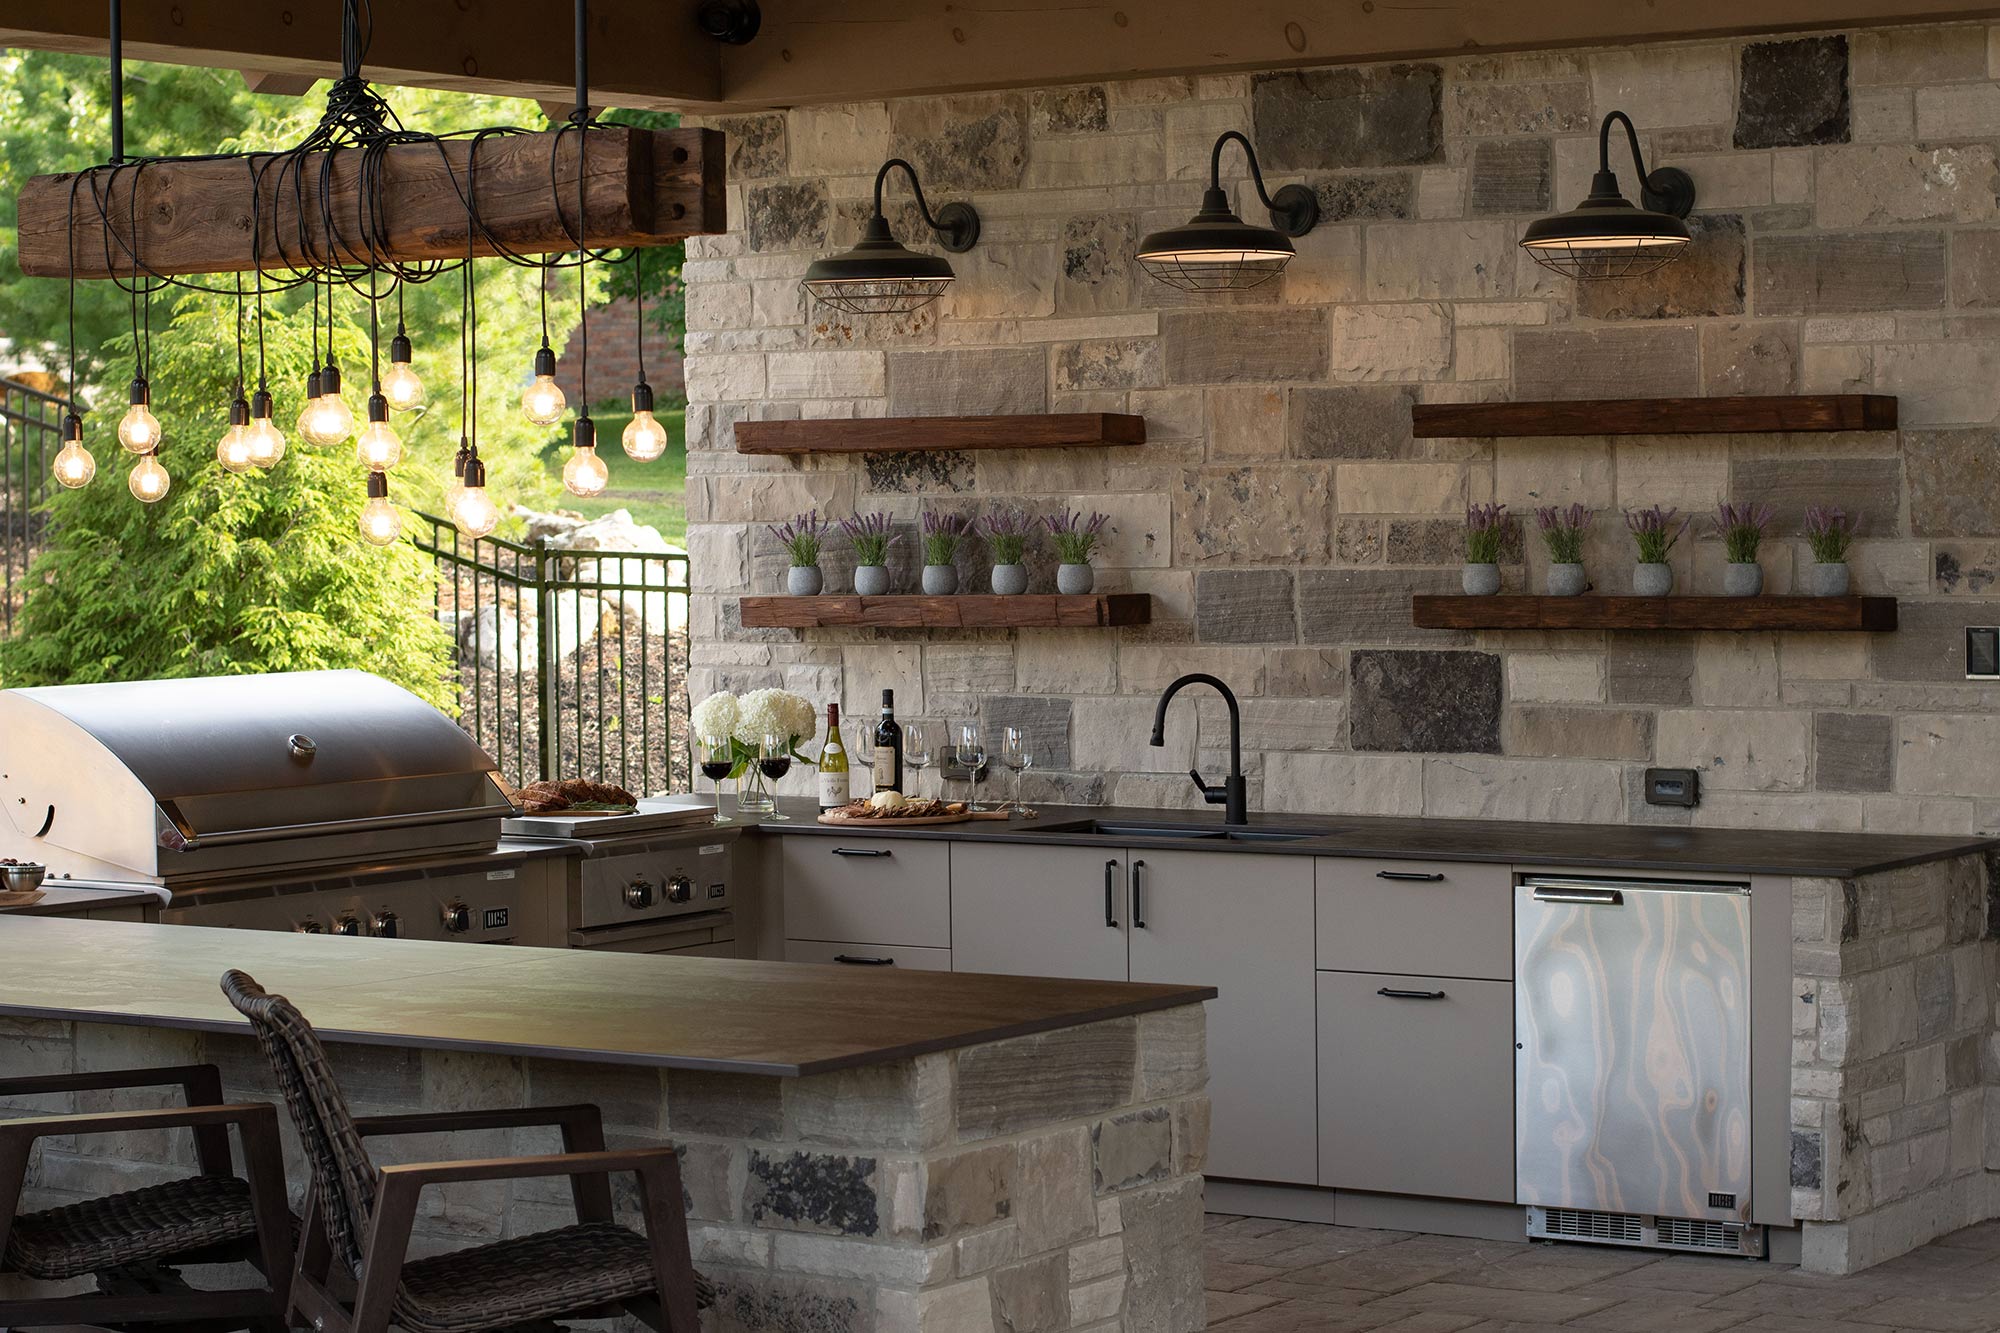 Image of Urban Bonfire x Frontiers Design Build 1 in Oliveti selects Dekton for its Outdoor Kitchens - Cosentino